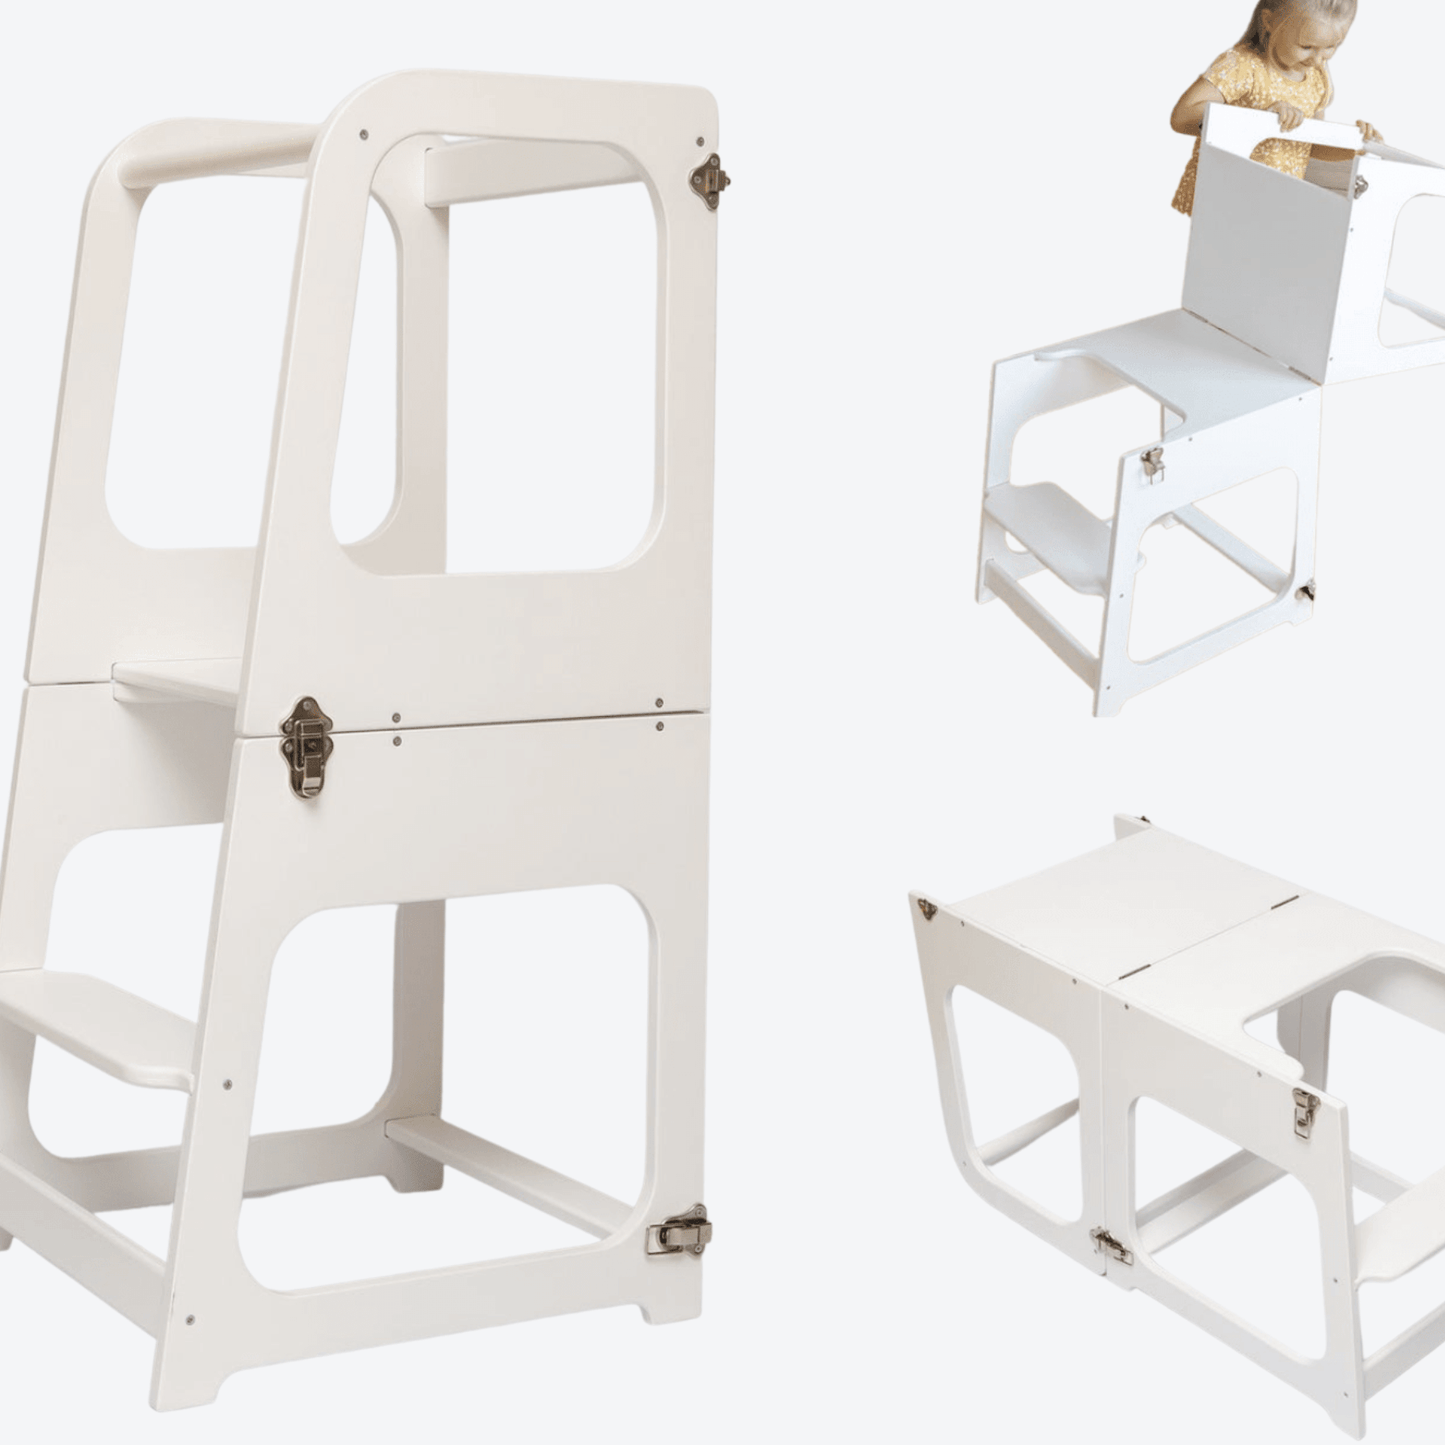 Convertible Wooden Learning Tower - Transforms from tower to table/chair